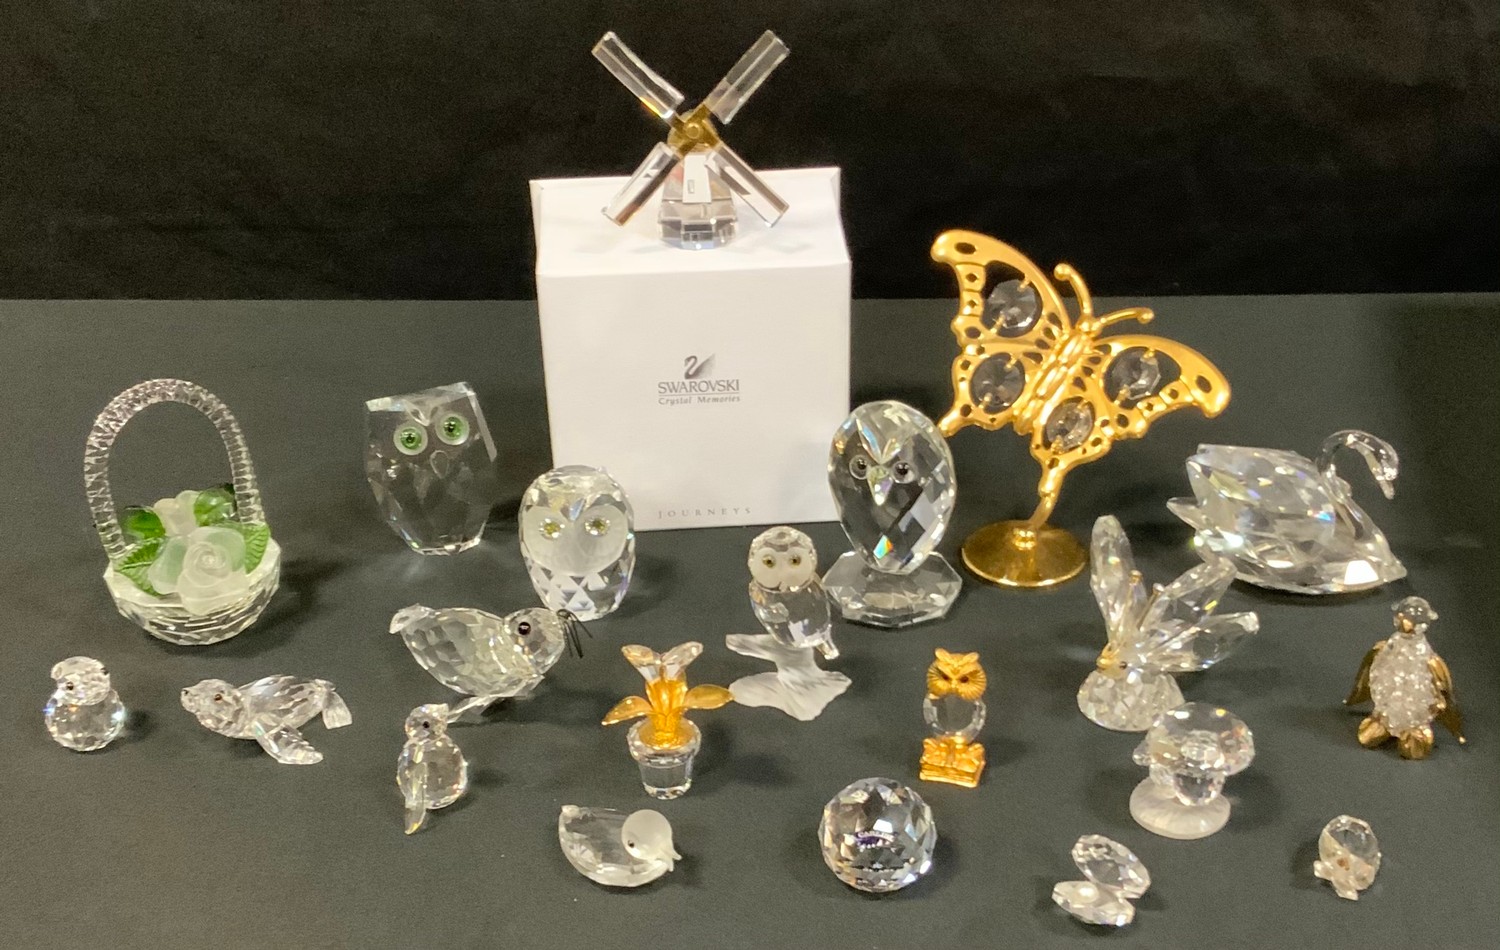 A pair of Swarovski crystal models Seal & Pup; others Windmill, Butterfly, Owls, Duck, Mushroom etc;